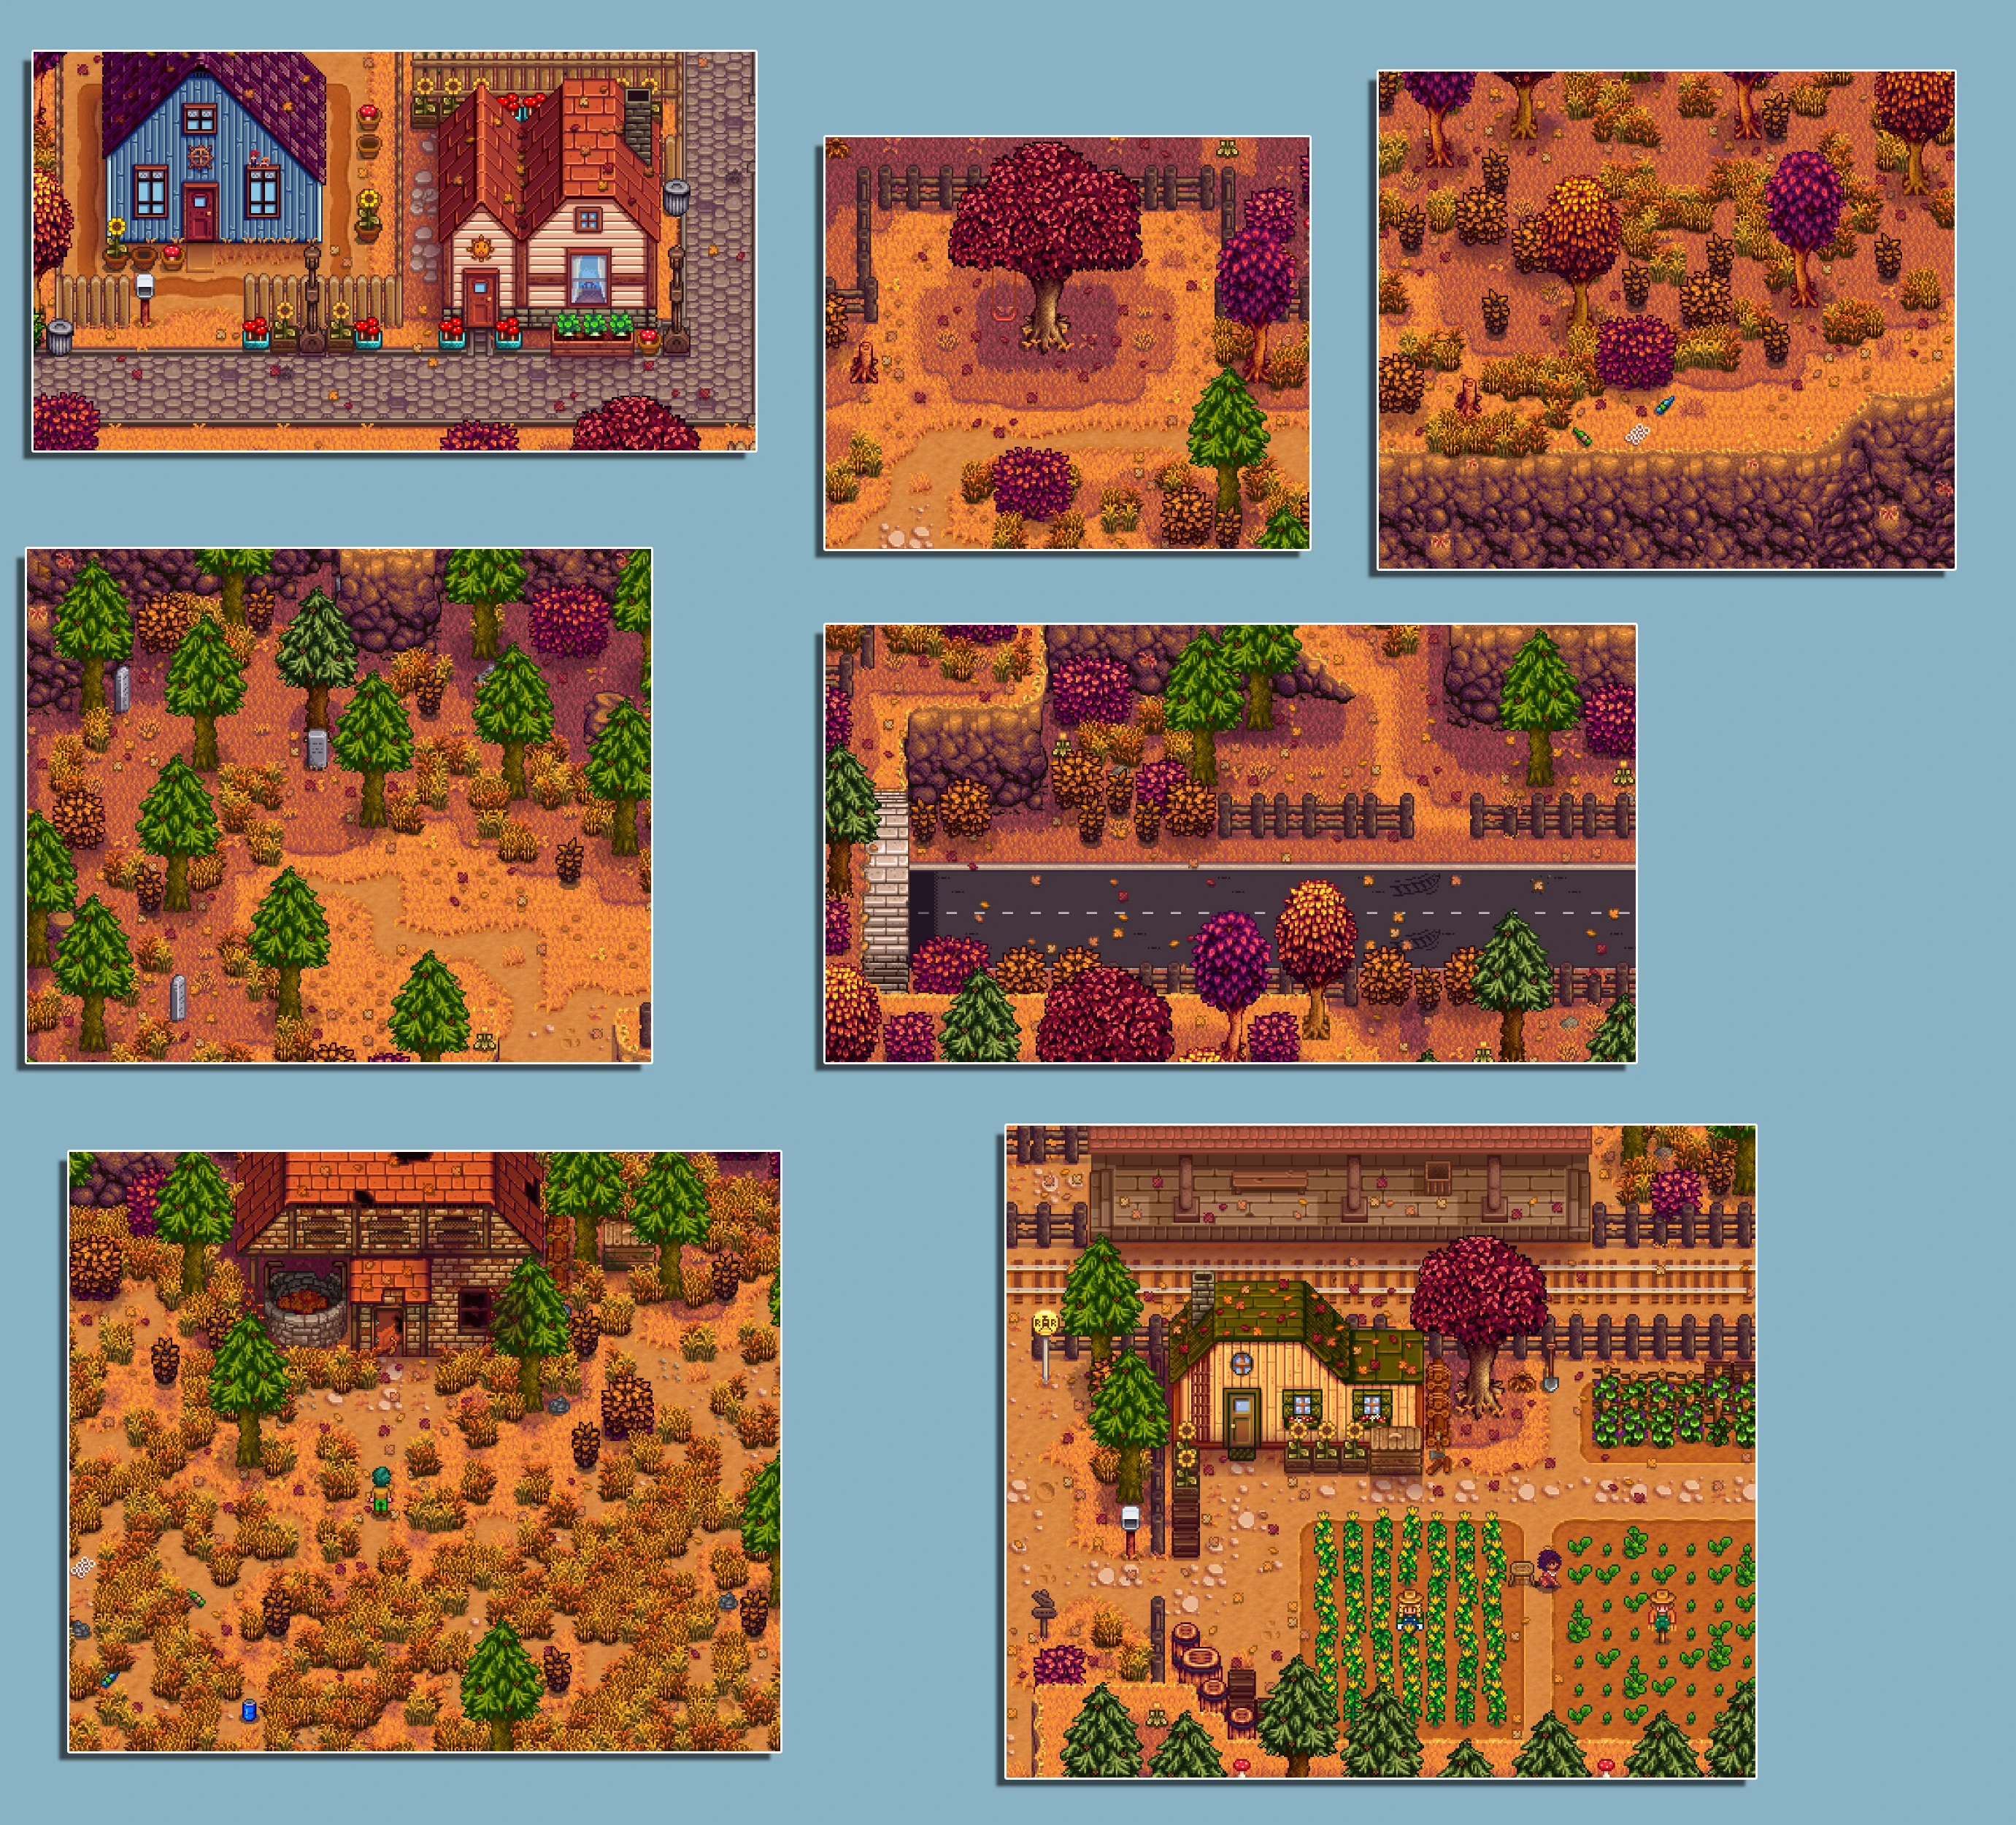 Stardew Valley Expanded - Autumn Leaves.